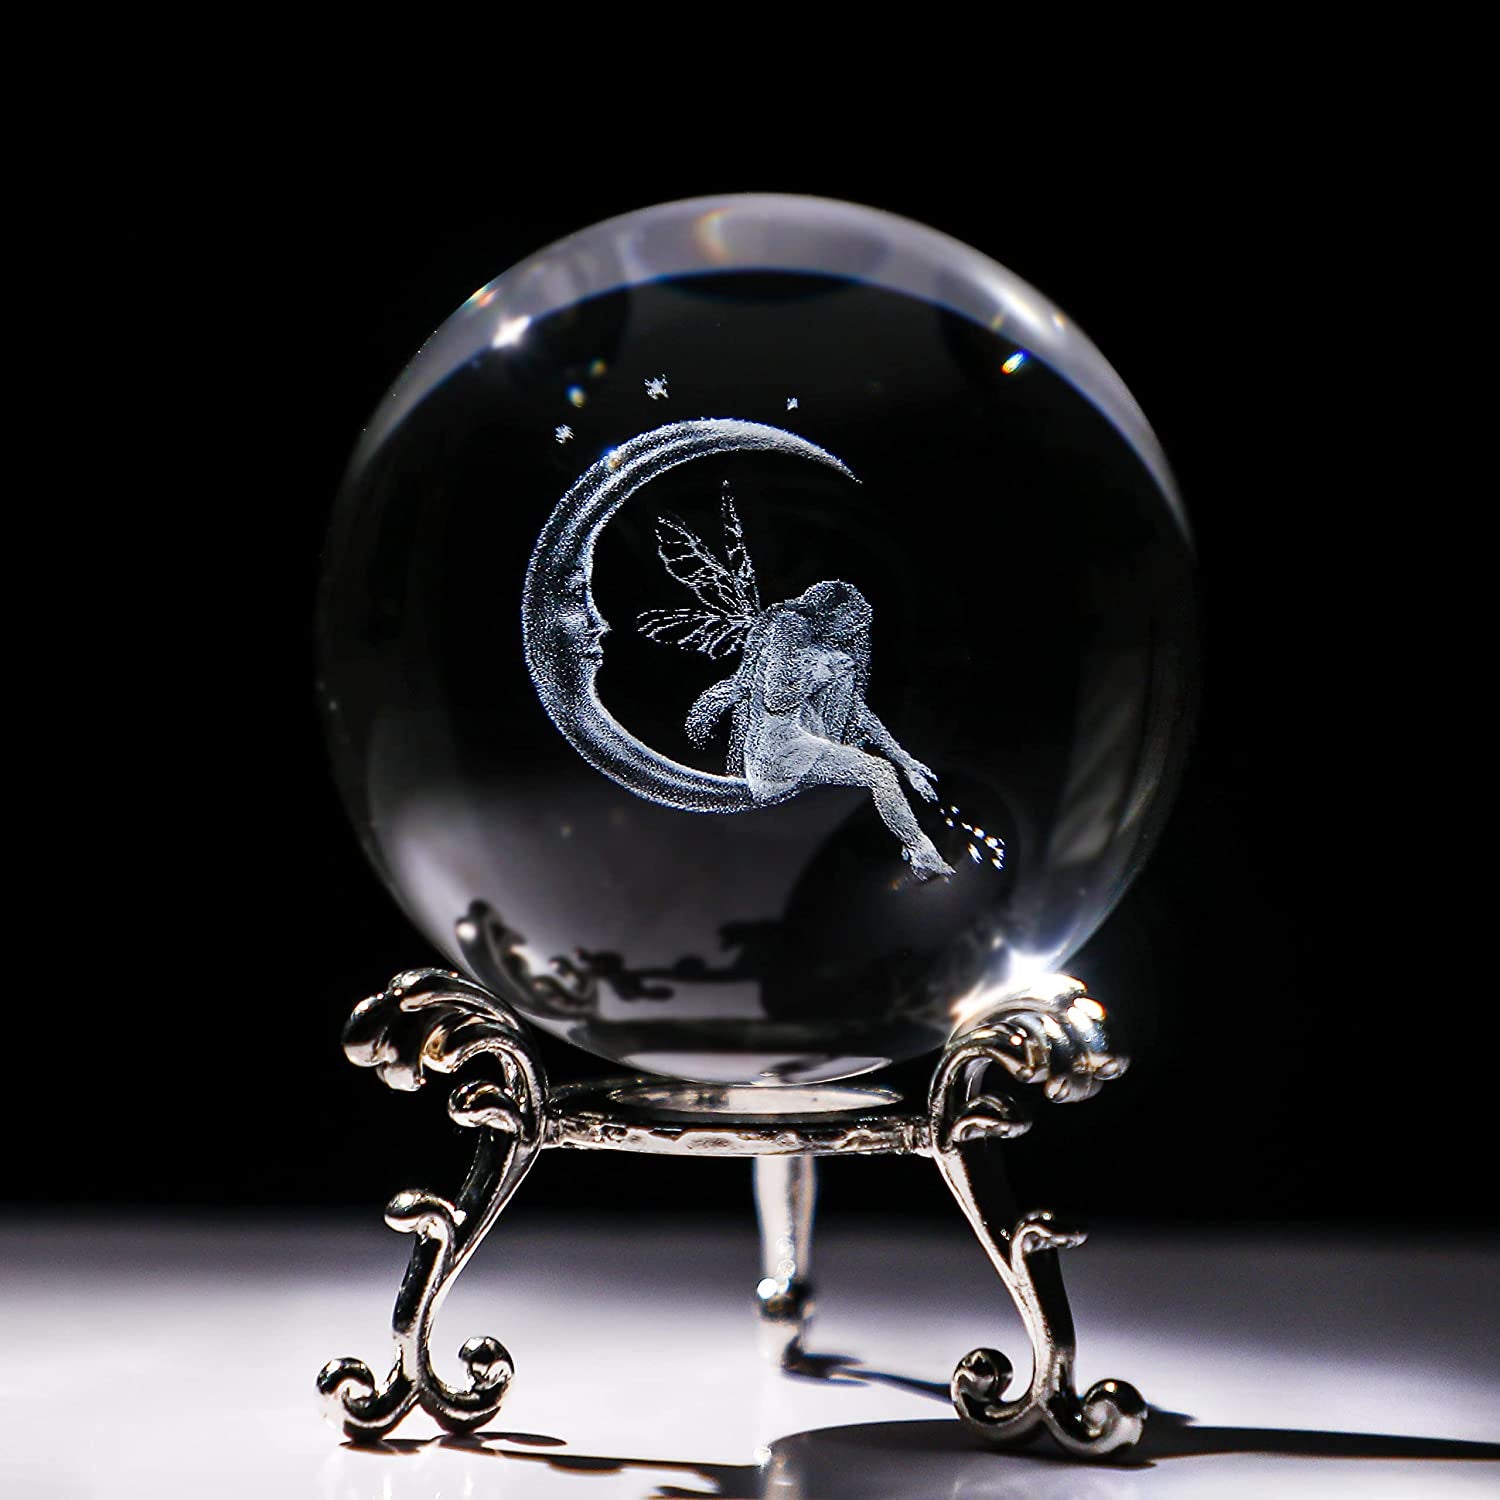 60Mm 3D Crystal Ball with Stand Glass Laser Moon and Fairy Ball Ornament Crystal Paperweights Figurine Home Art Decor Crafts with Metal Stand Gifts for Women